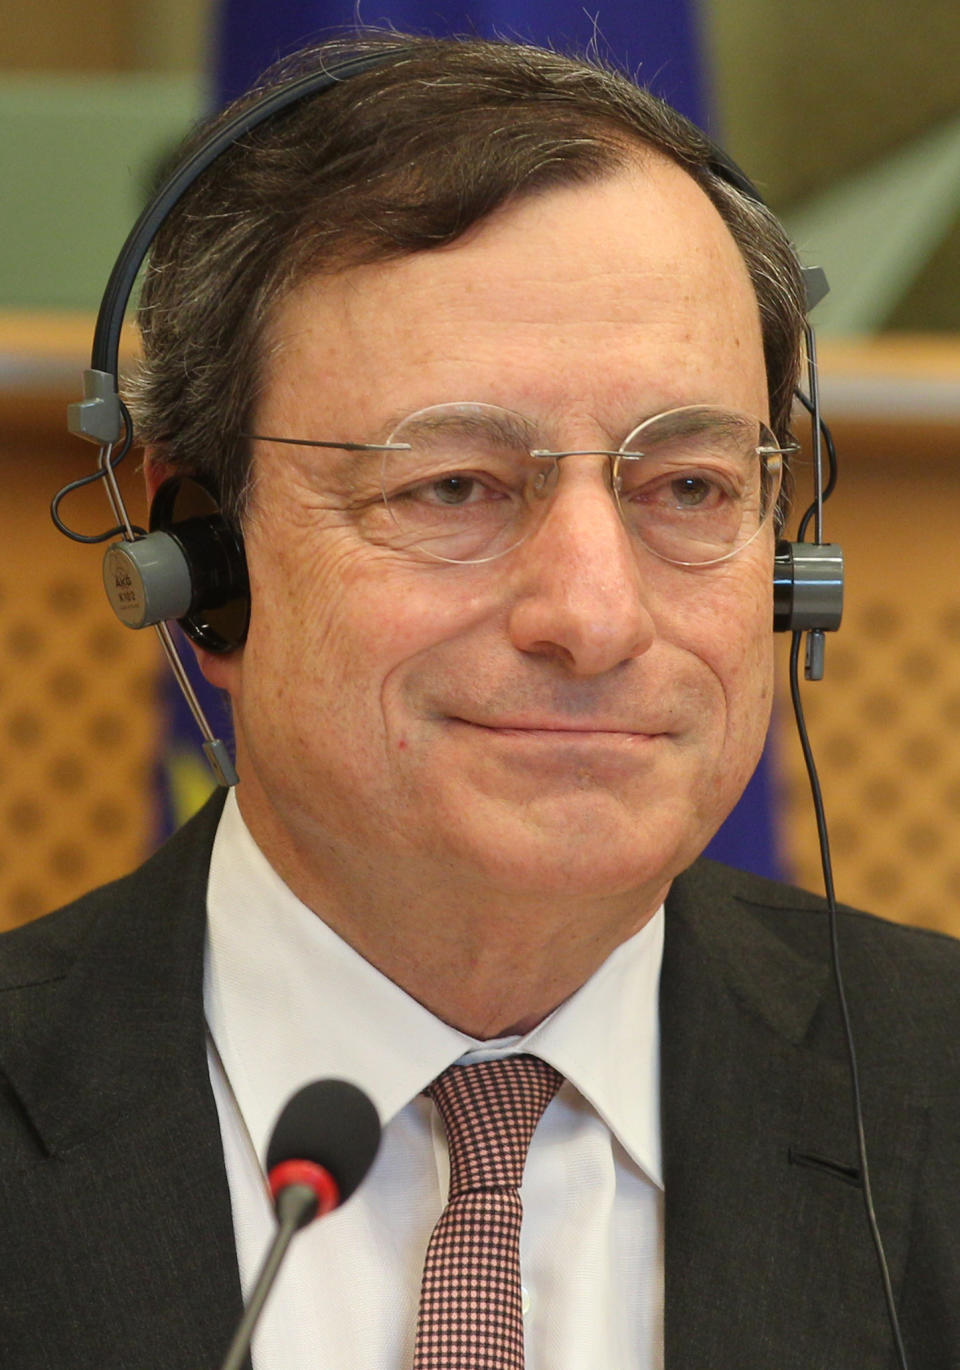 President of the European Central Bank Mario Draghi smiles as he reports to the Economic Committee, in capacity as the head of the European Systemic Risk Board, at the European Parliament in Brussels, Thursday, May 31, 2012. (AP Photo/Yves Logghe)